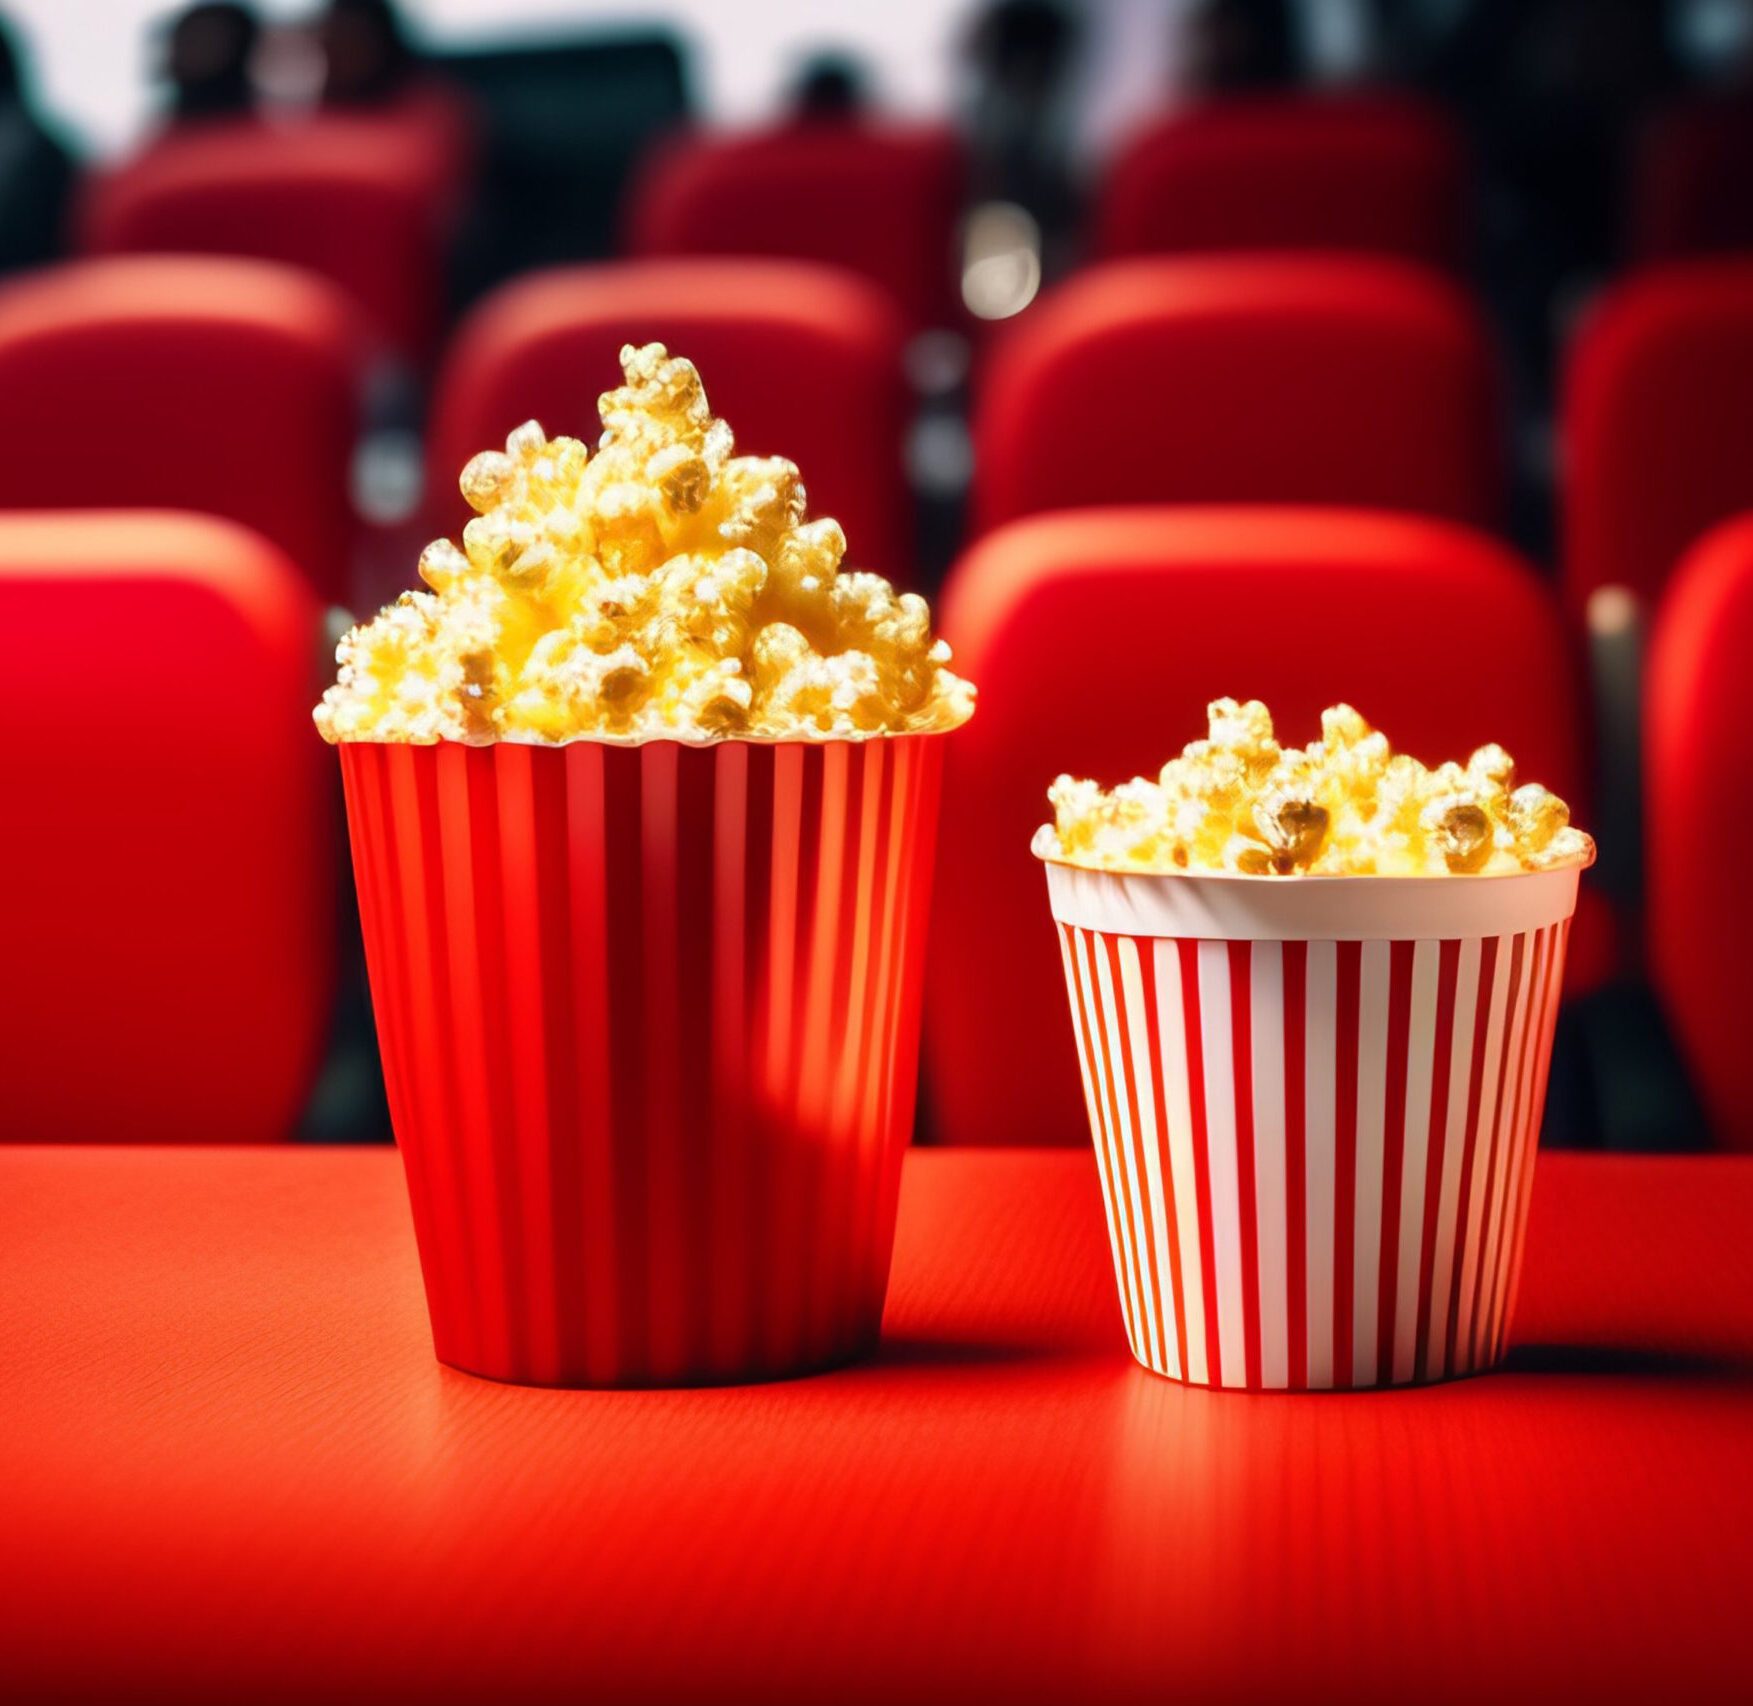 two-popcorn-red-table-front-movie-theater